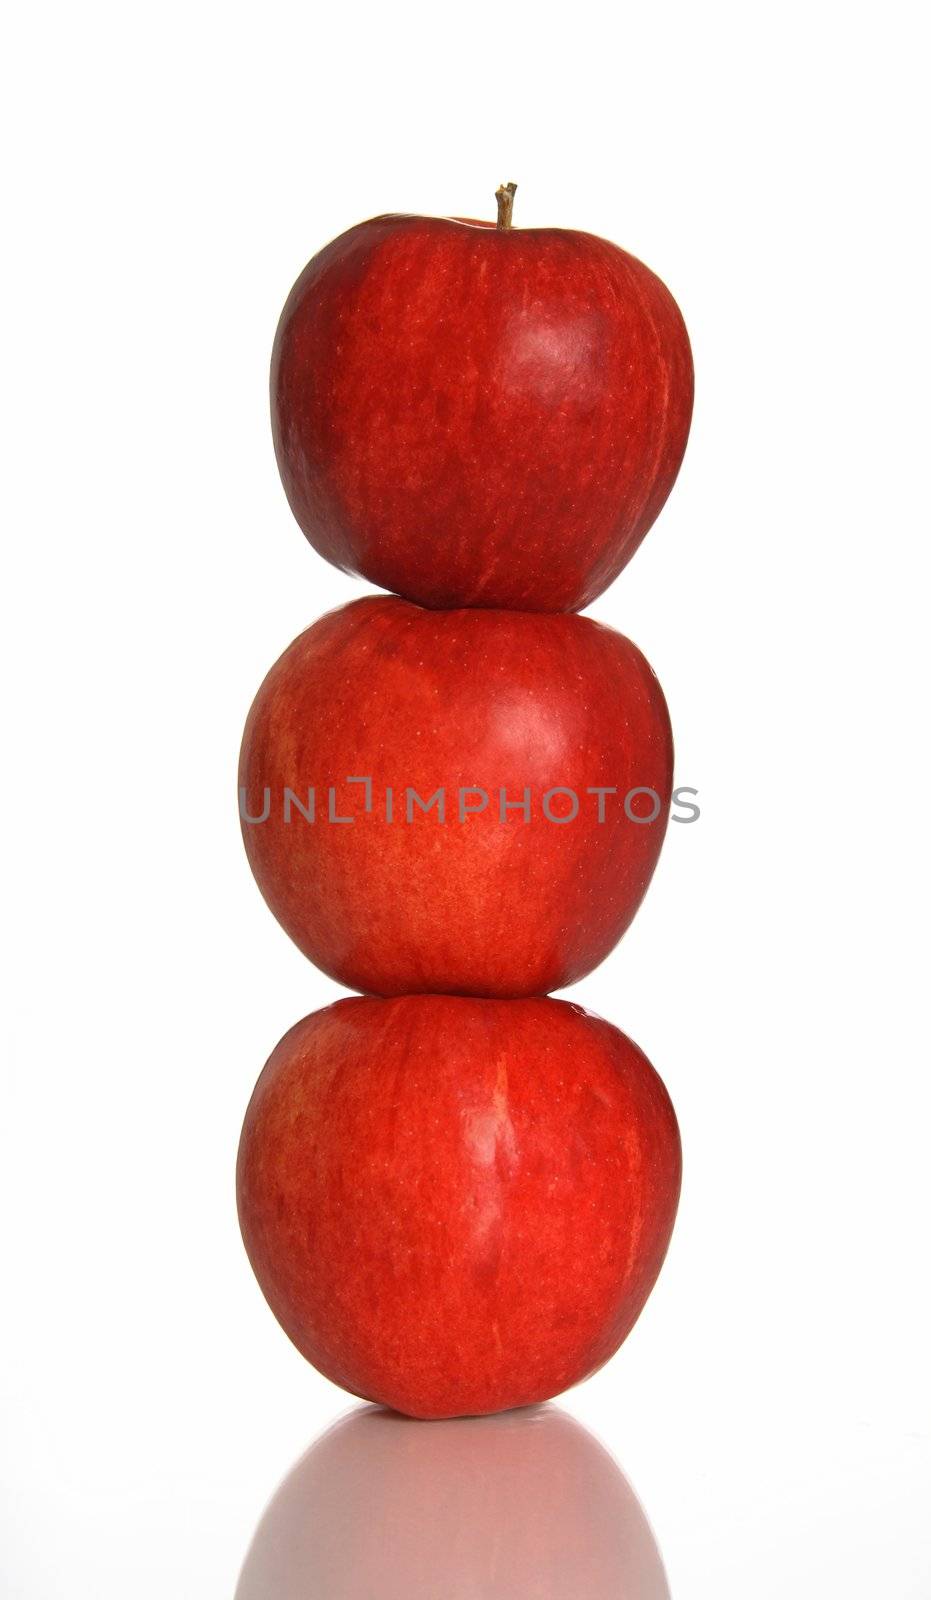 Balance. Three red apples one on another.